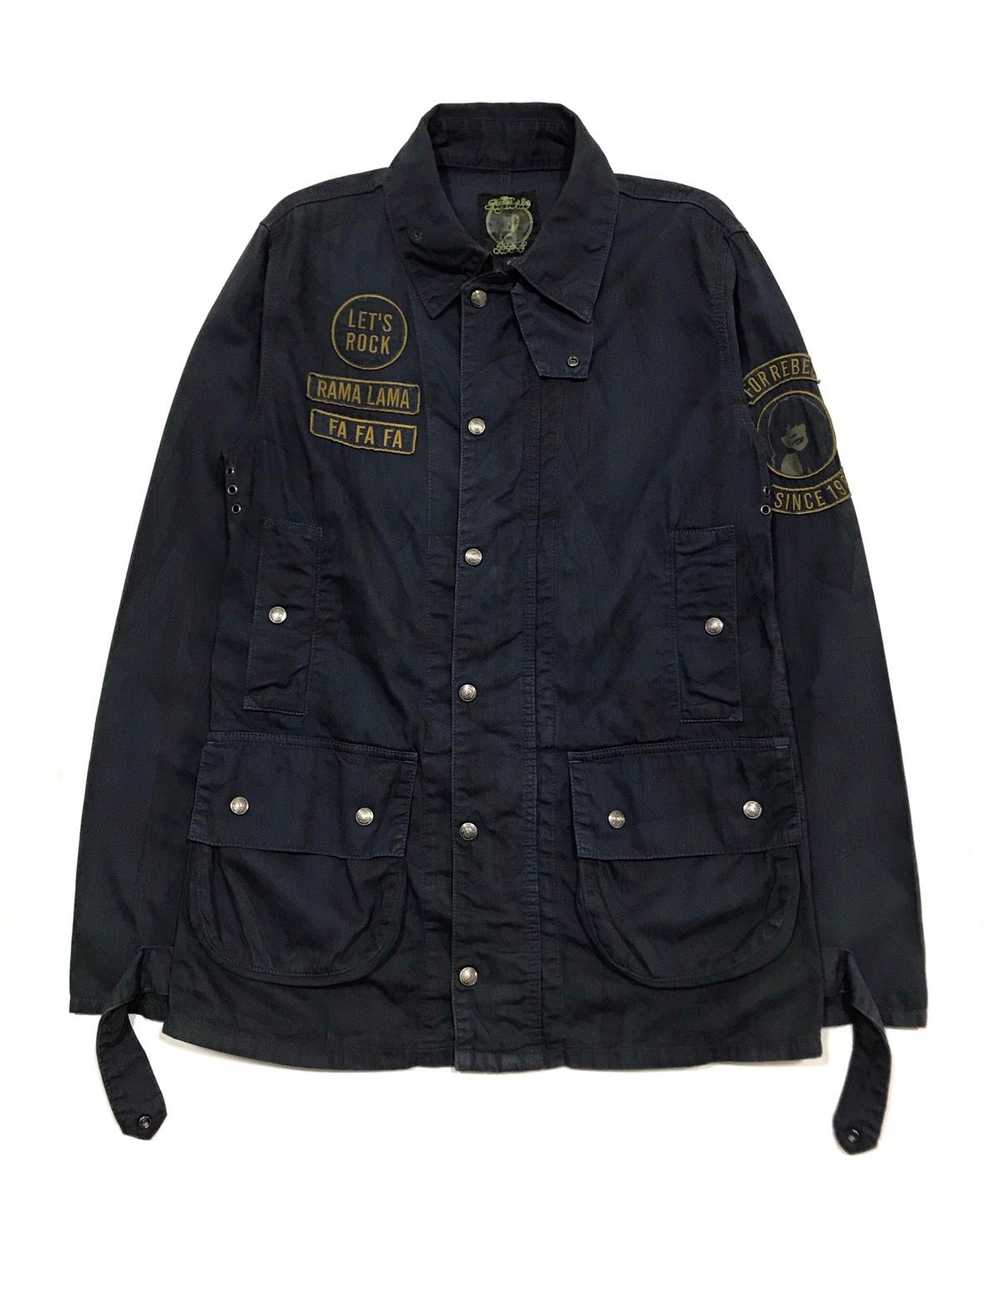 Hysteric Glamour HG “Dirty” Oil Spilled Jacket - image 1